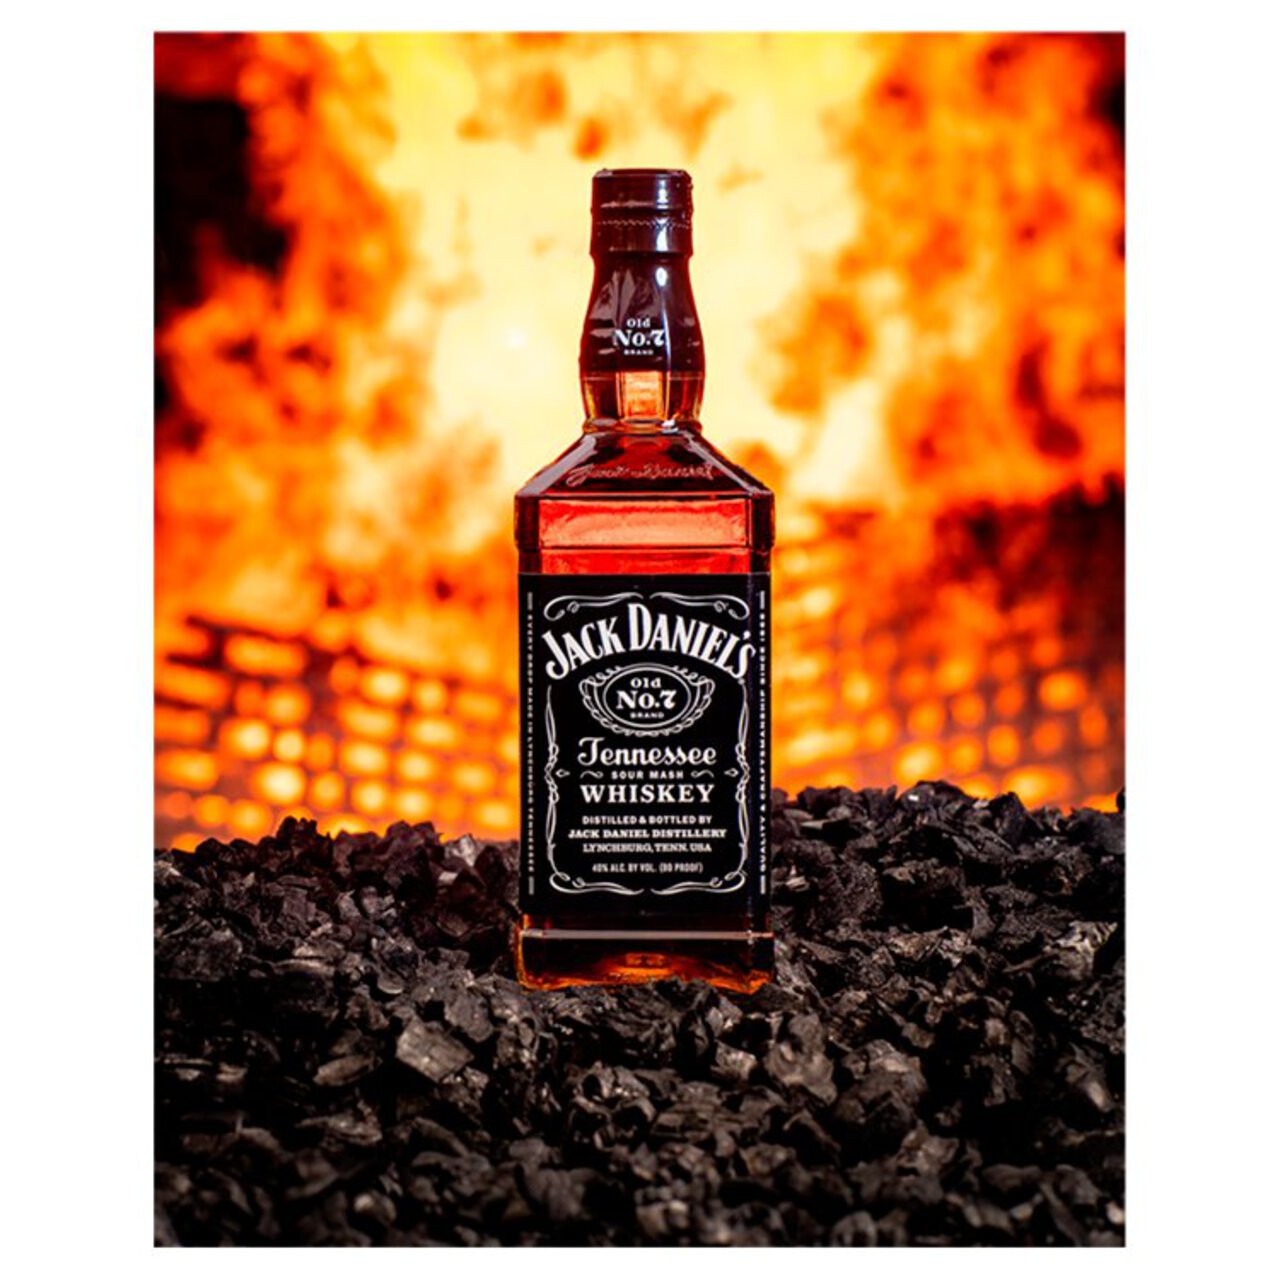 Jack Daniel's Legacy Limited Edition Whiskey 70cl